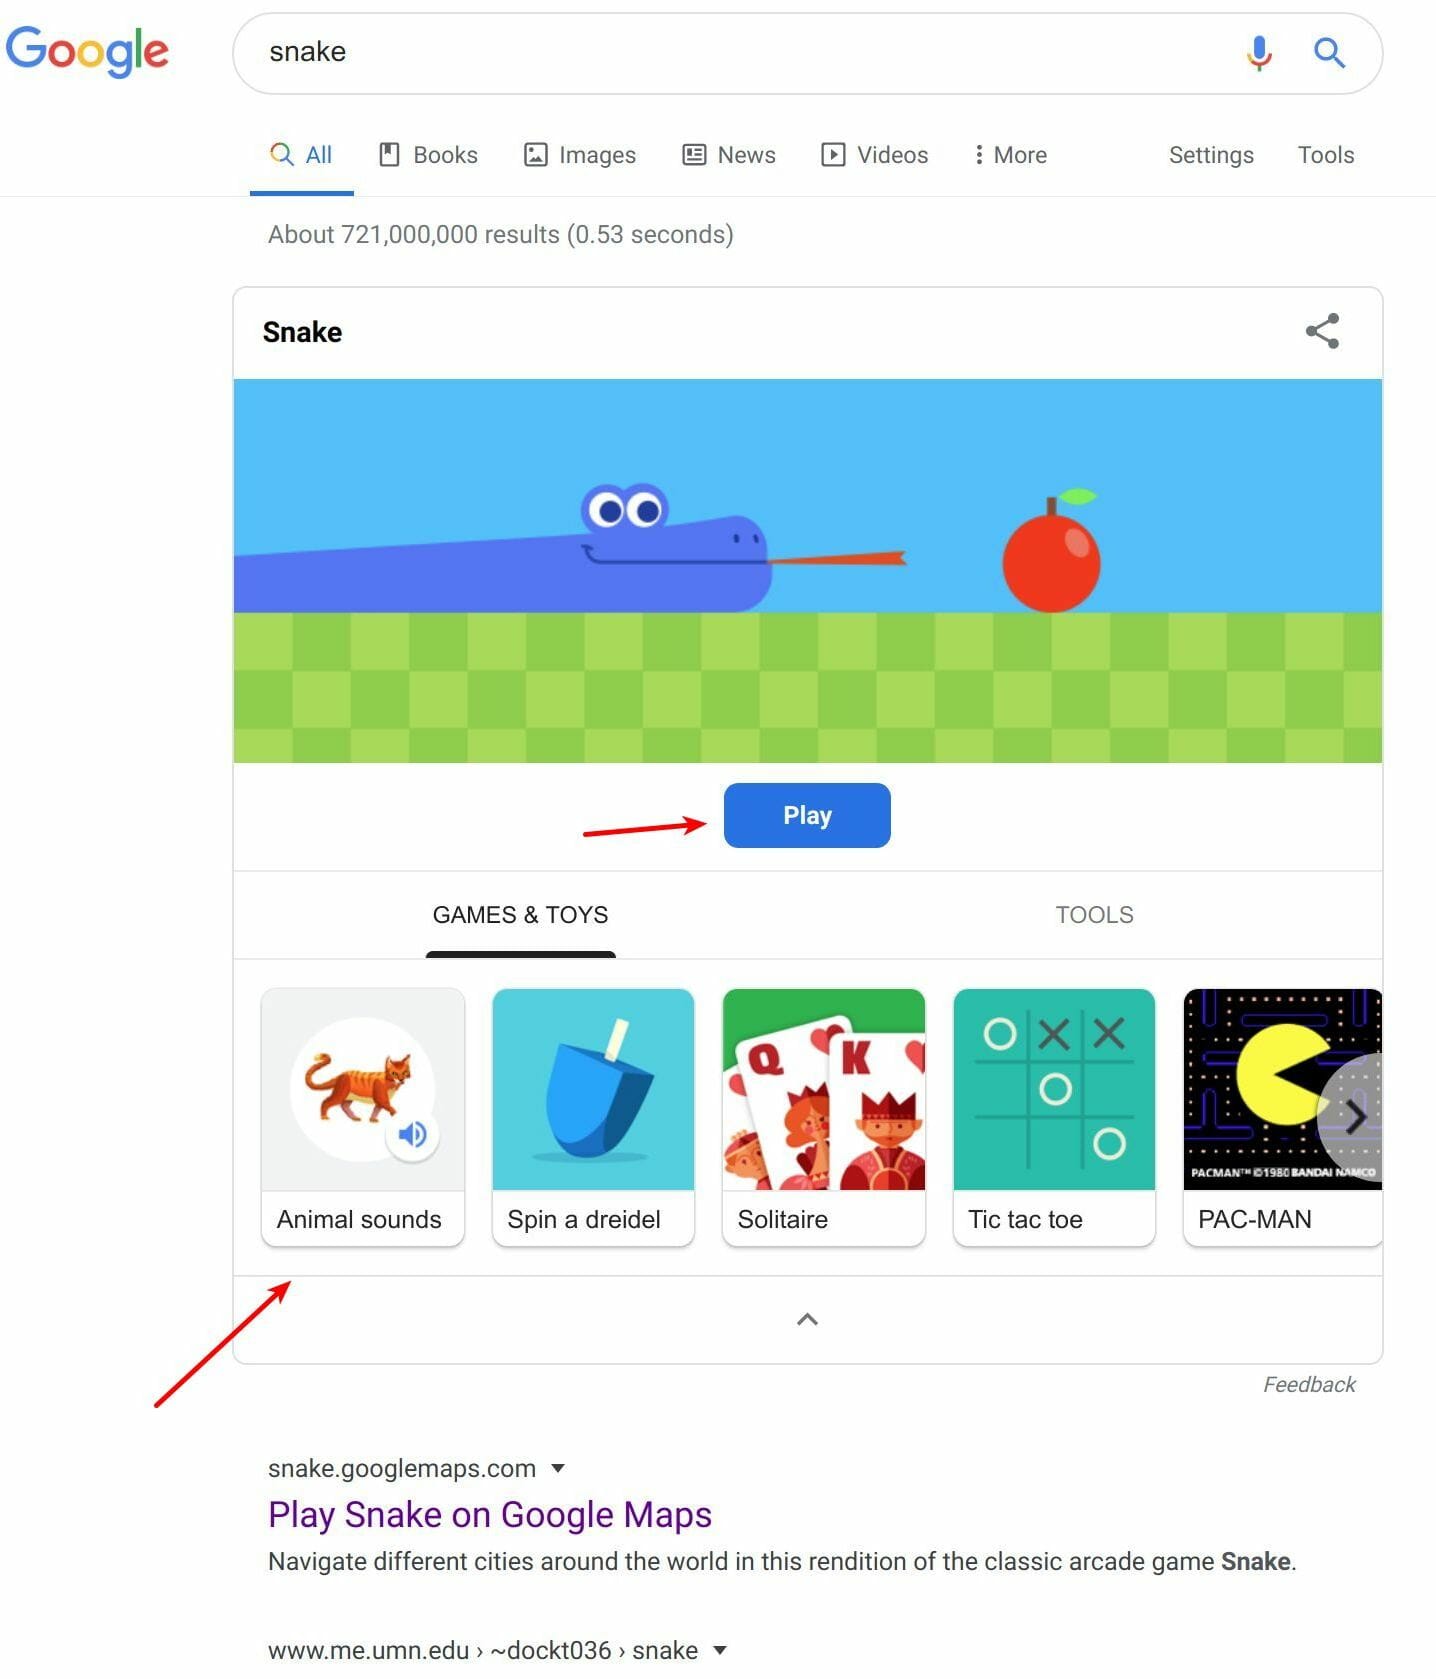 Free mini games like snake in Google search results